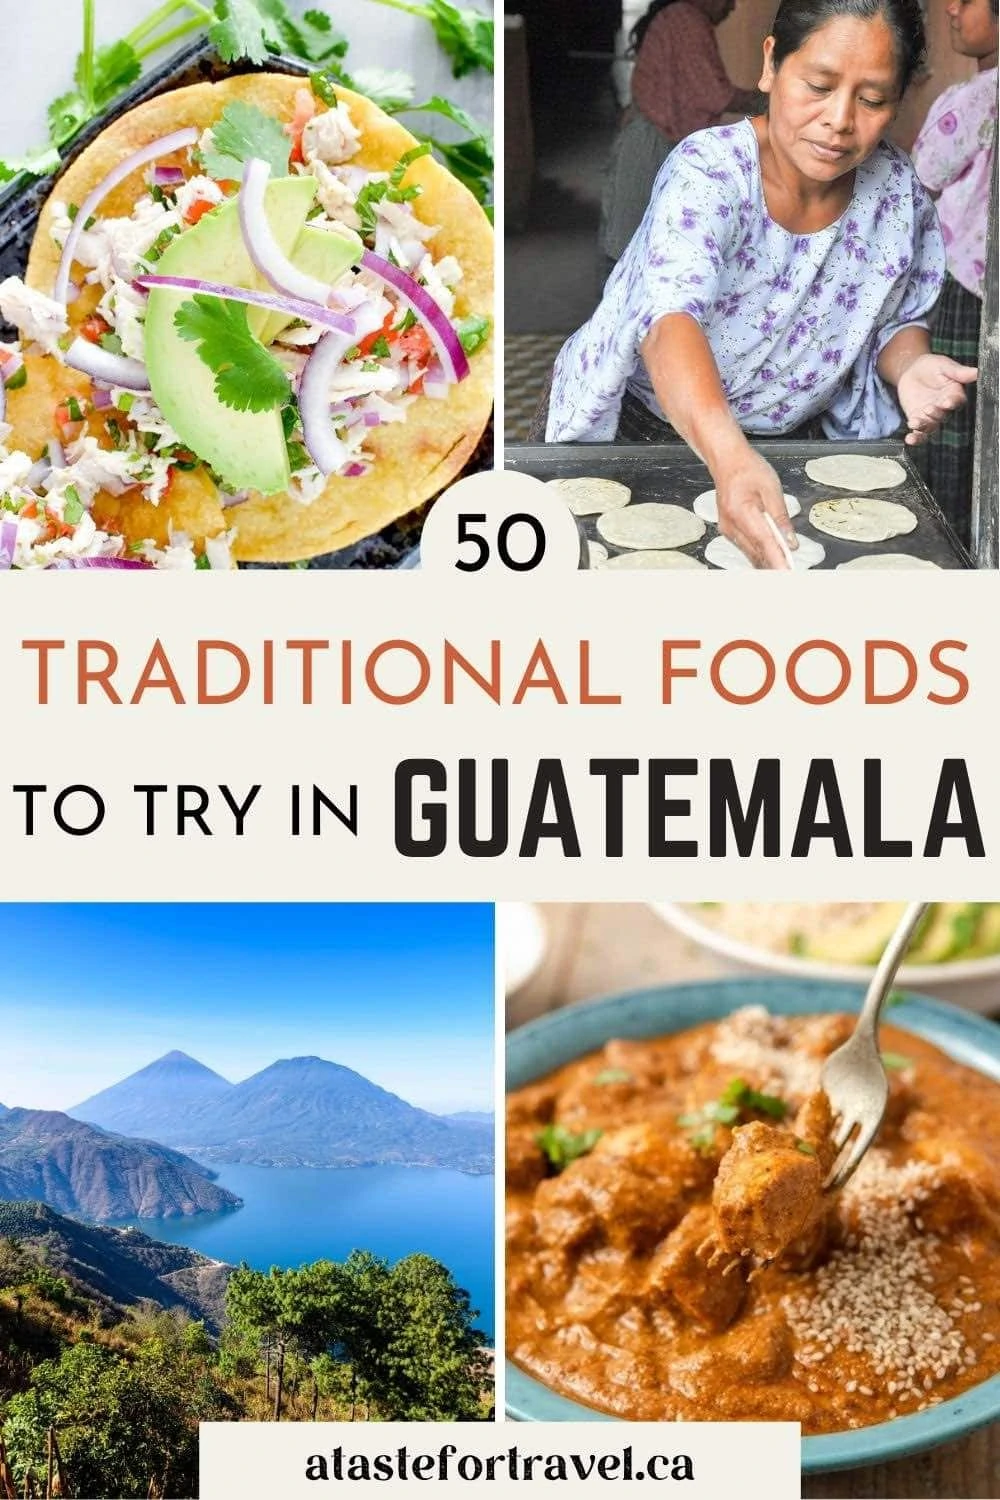 Traditional Guatemalan food collage with text overlay for Pinterest.